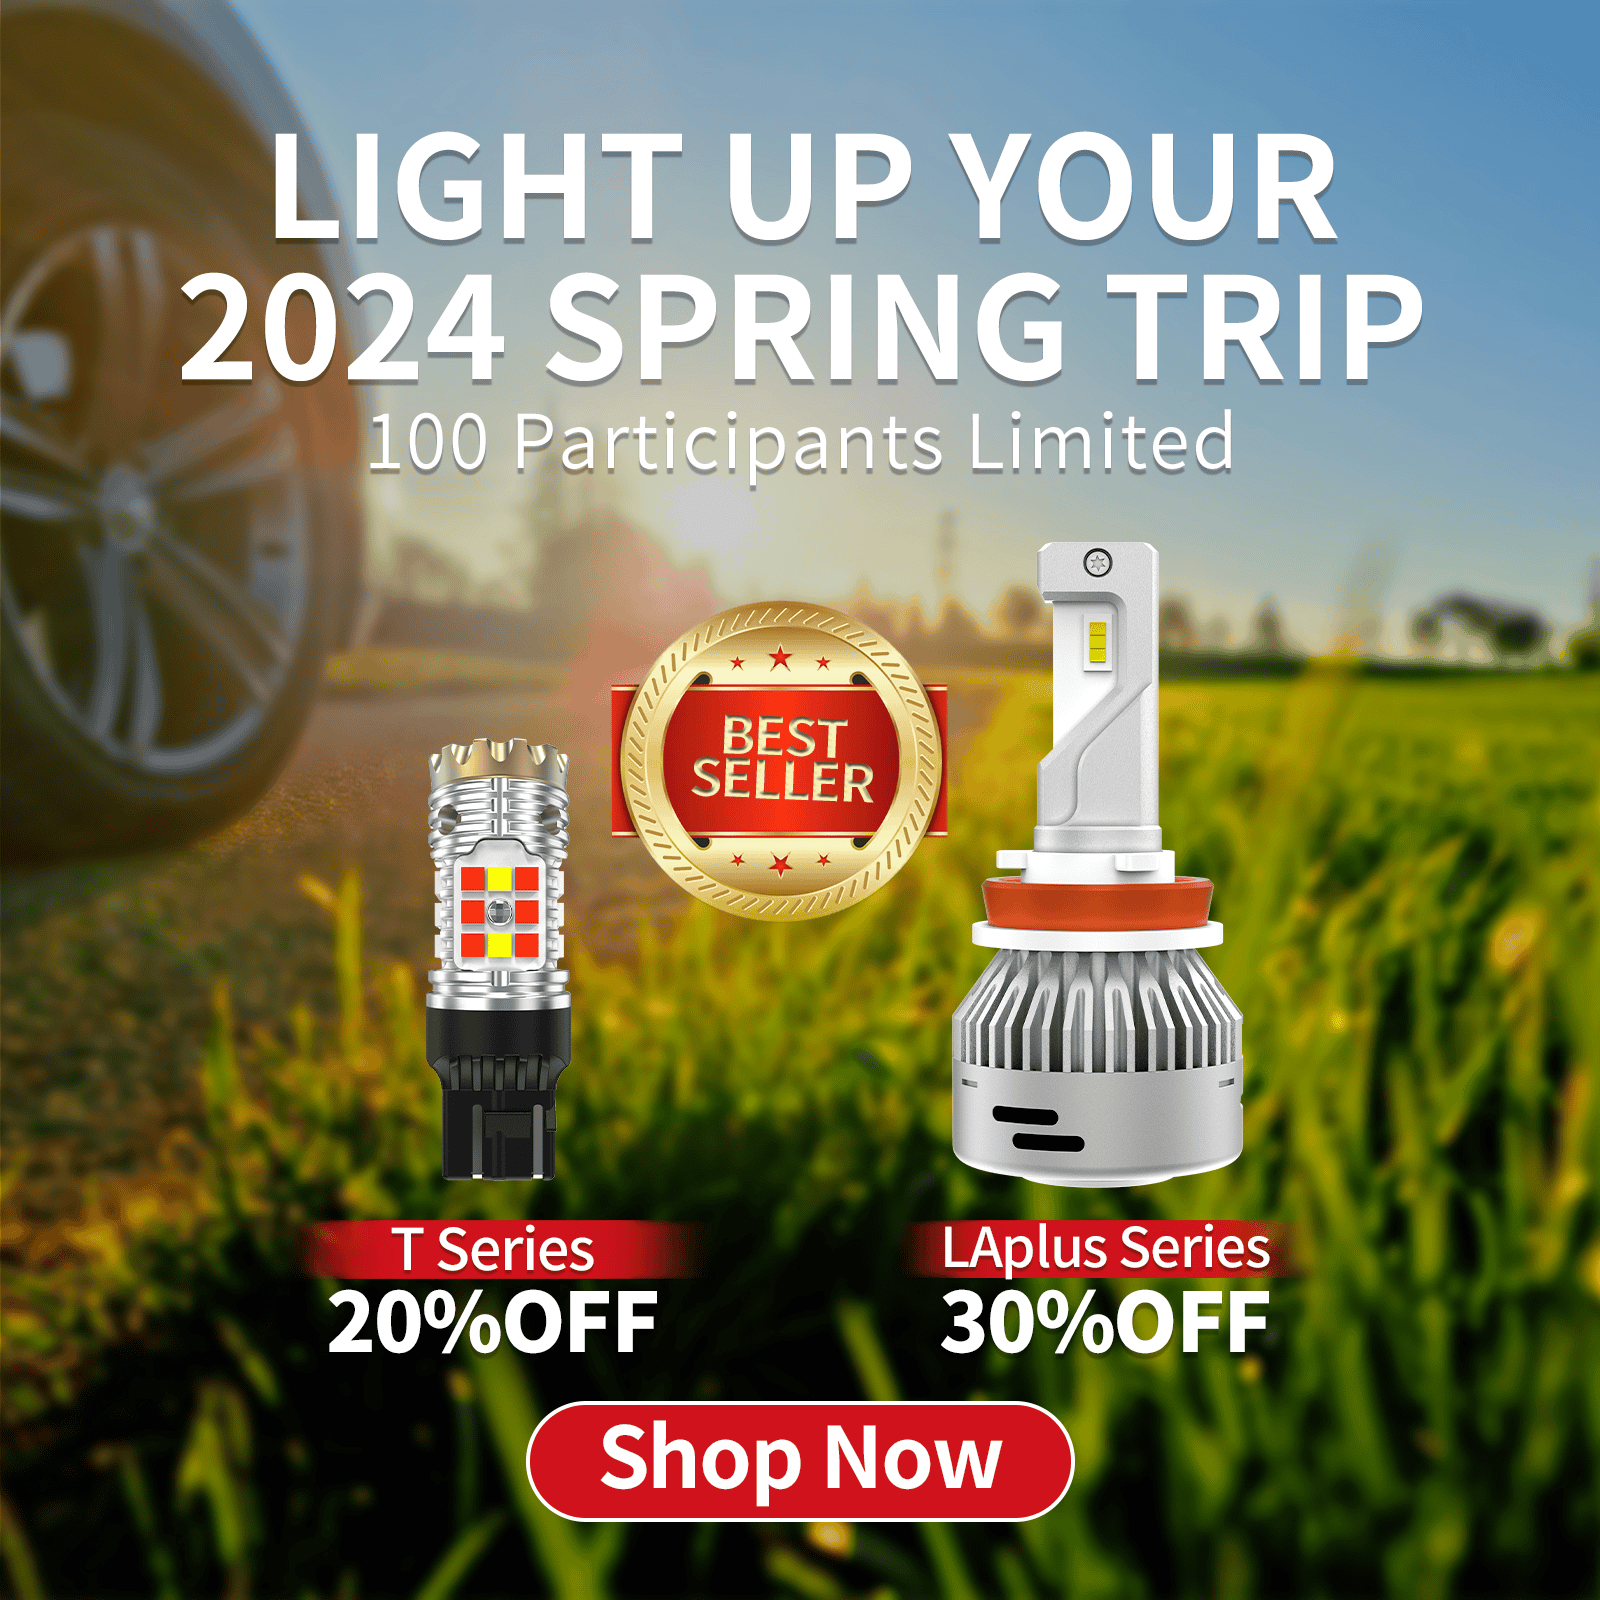 Ford F-150 Lightning Lasfit Spring Travel Limited-Time Discounts on LAplus & T20 Series! LA